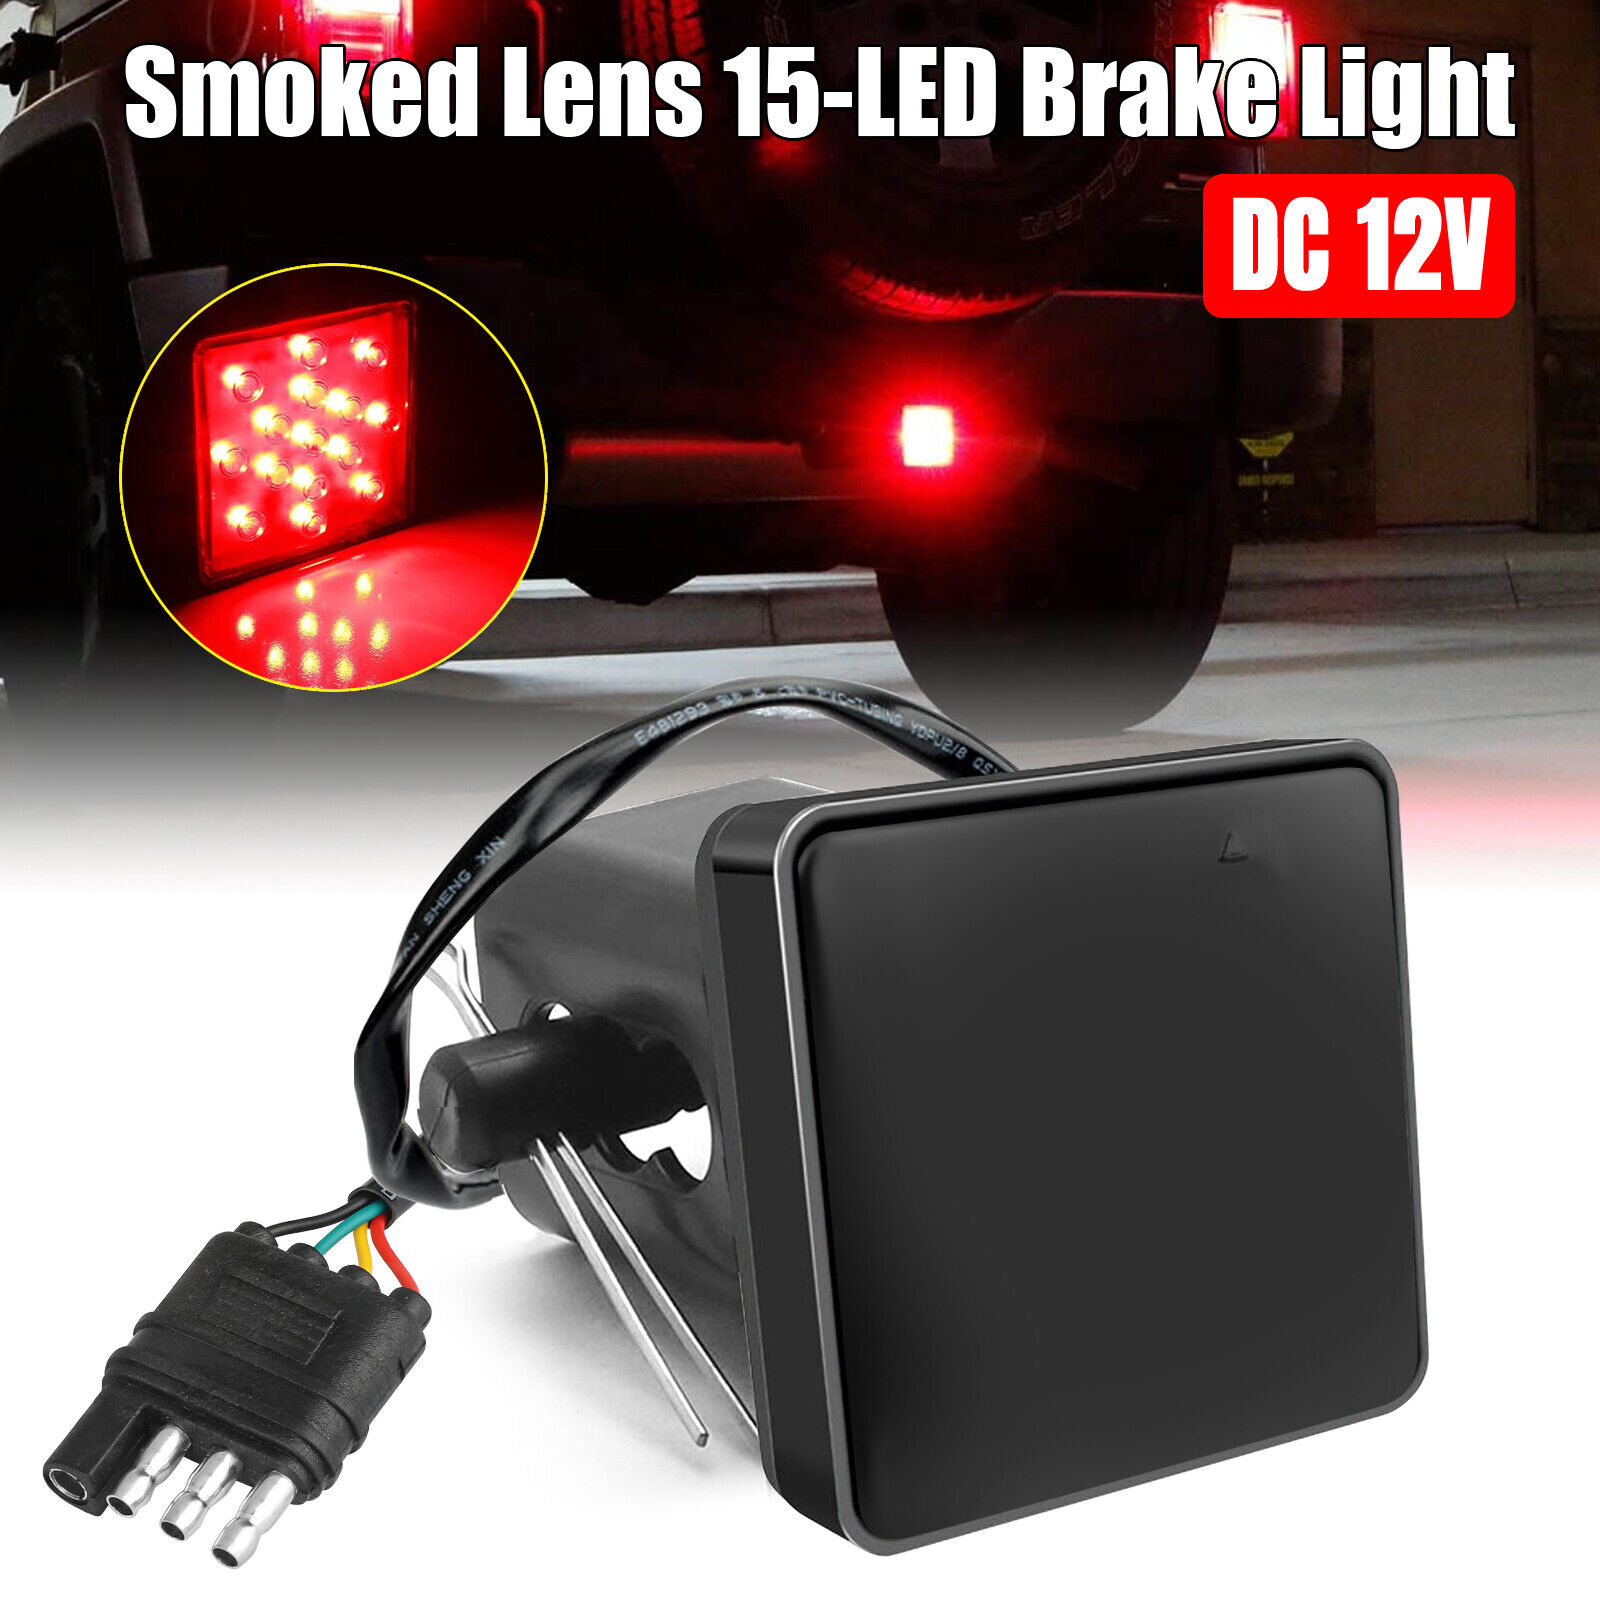 Smoked Lens 15-LED Brake Light DRL Trailer Hitch Cover Fit 2\